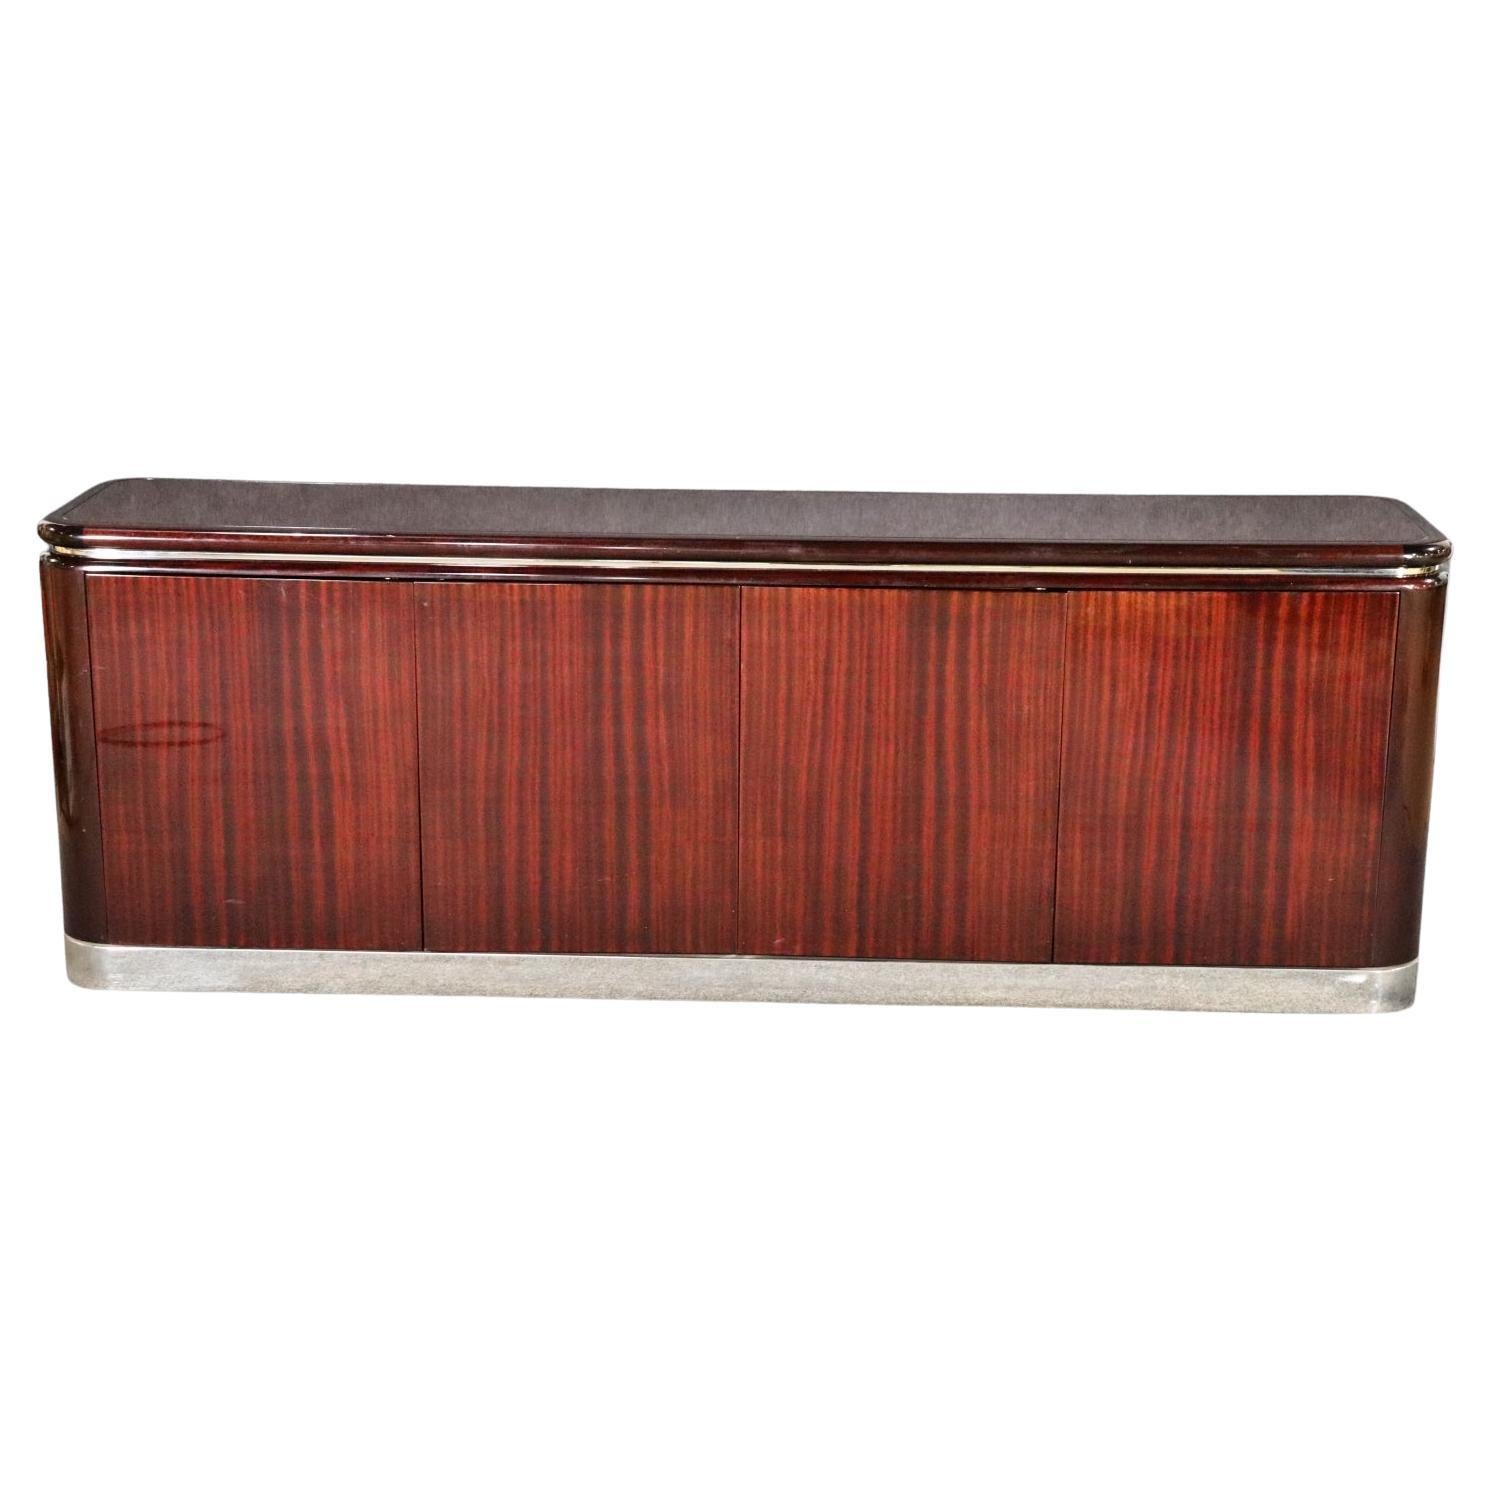 Rosewood Art Deco Pace Style Sideboard Buffet, circa 1980